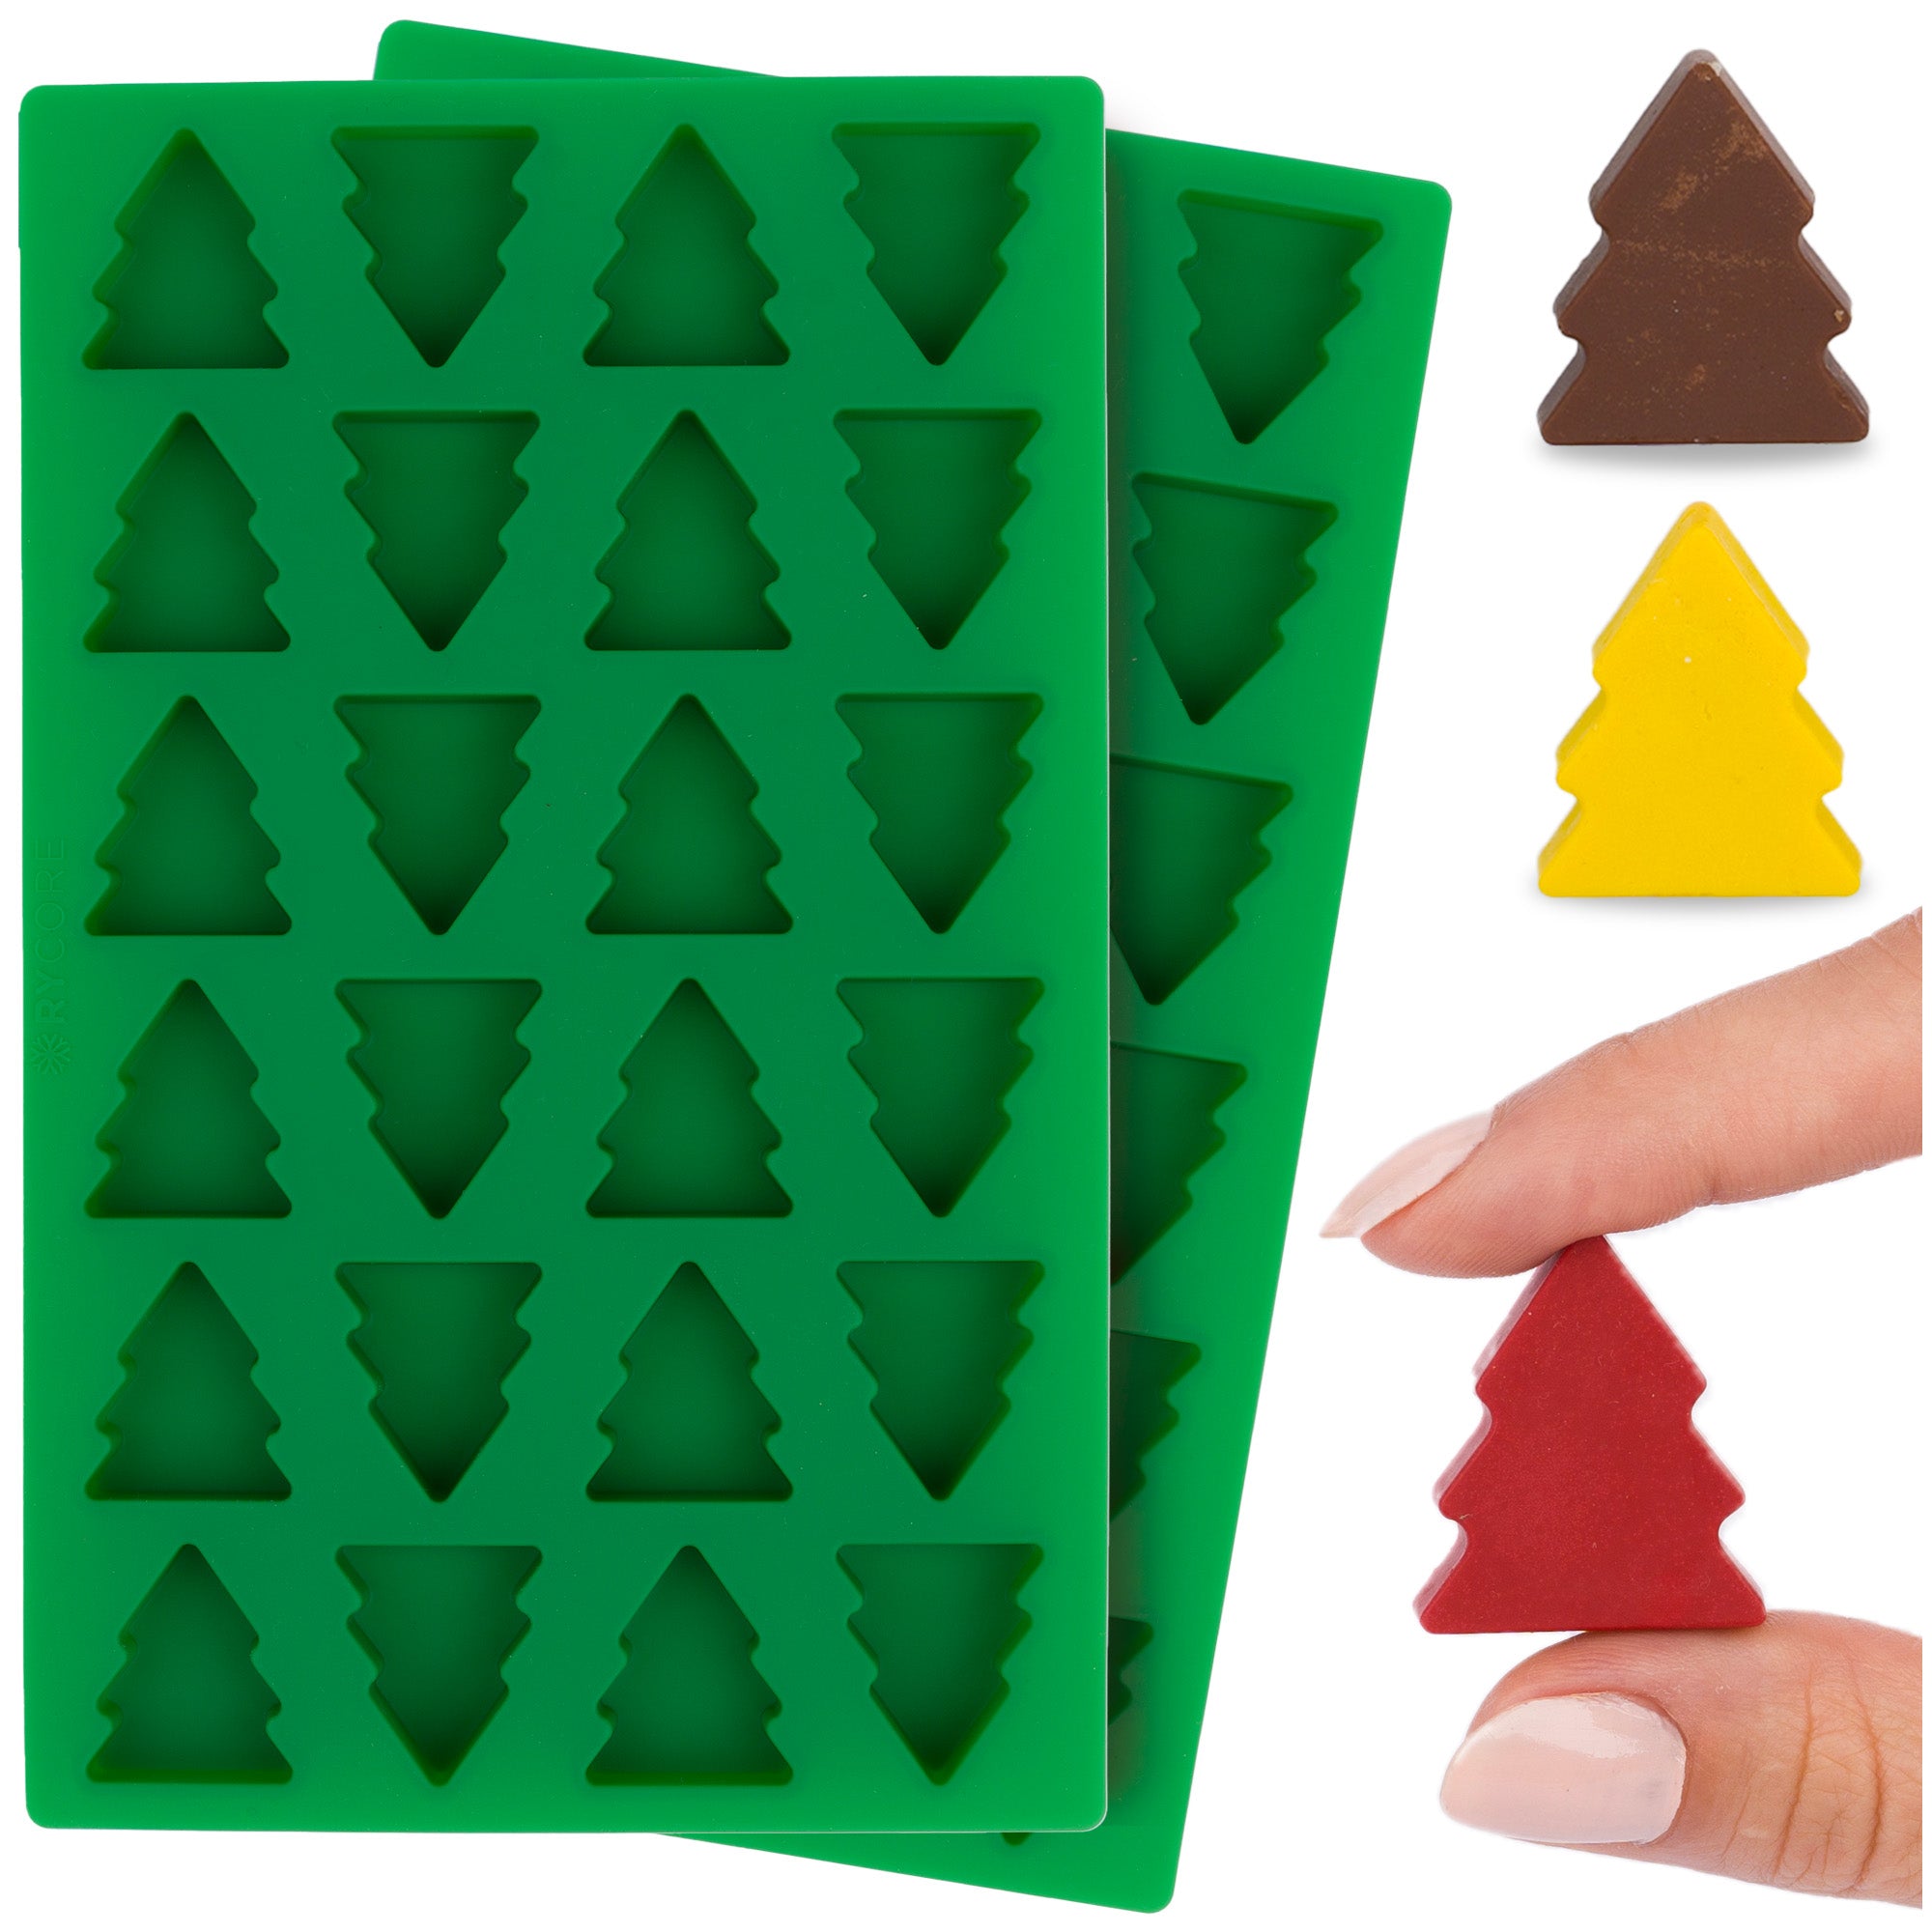 Holiday Silicone Molds for Baking, Ice & More